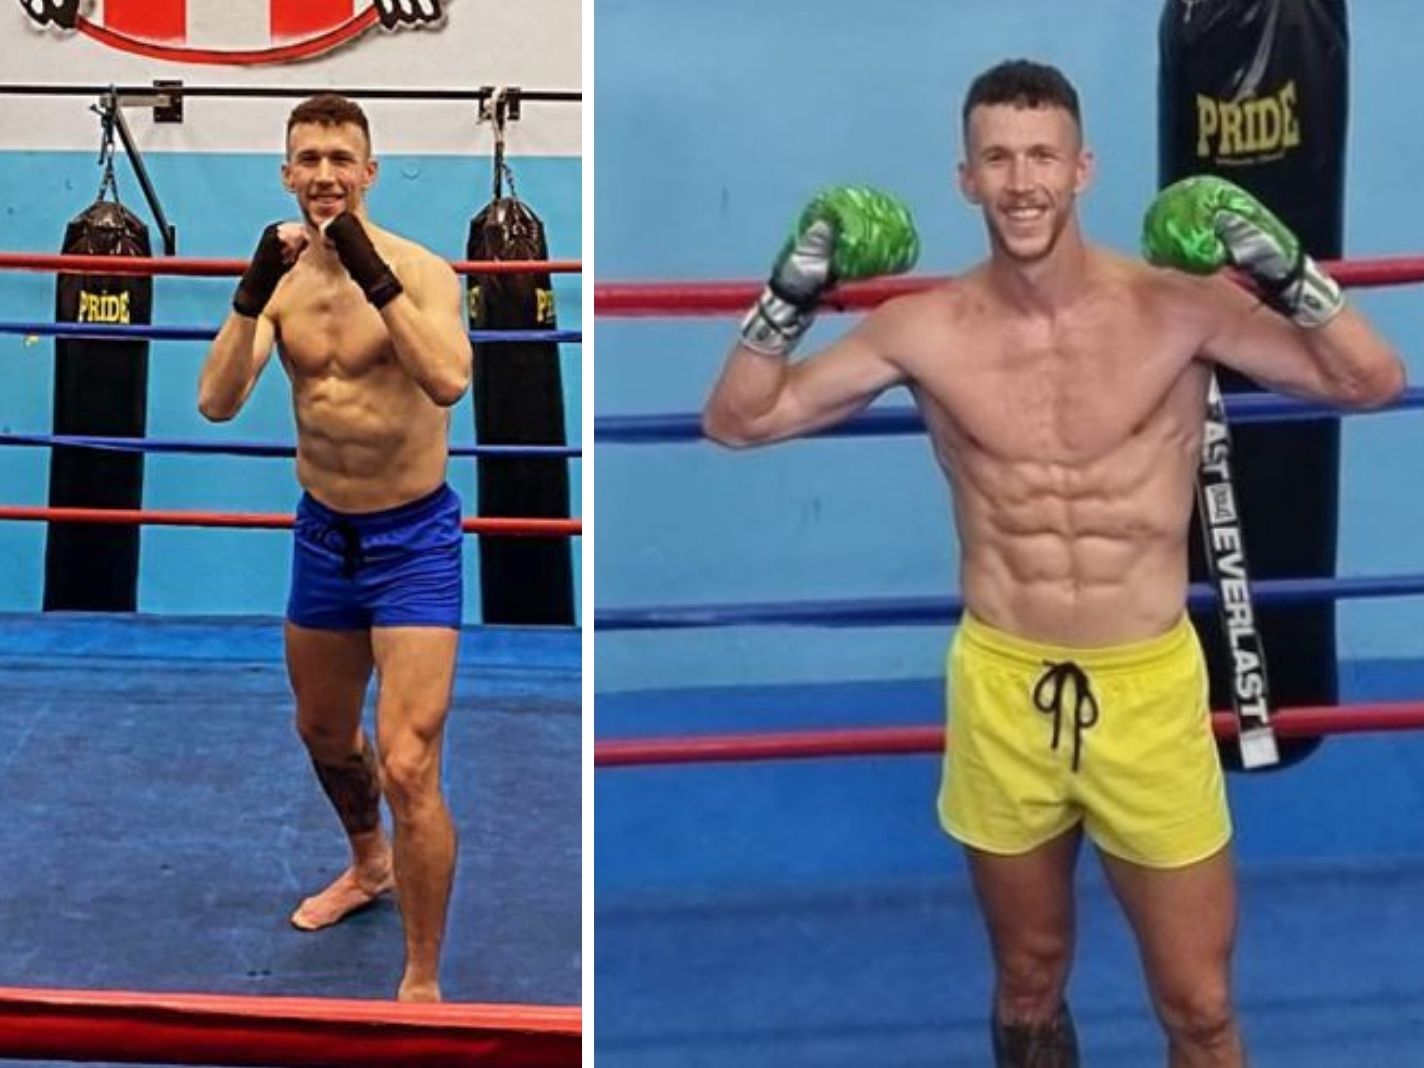 Ivan Perisic shows off shredded abs in new workout photo